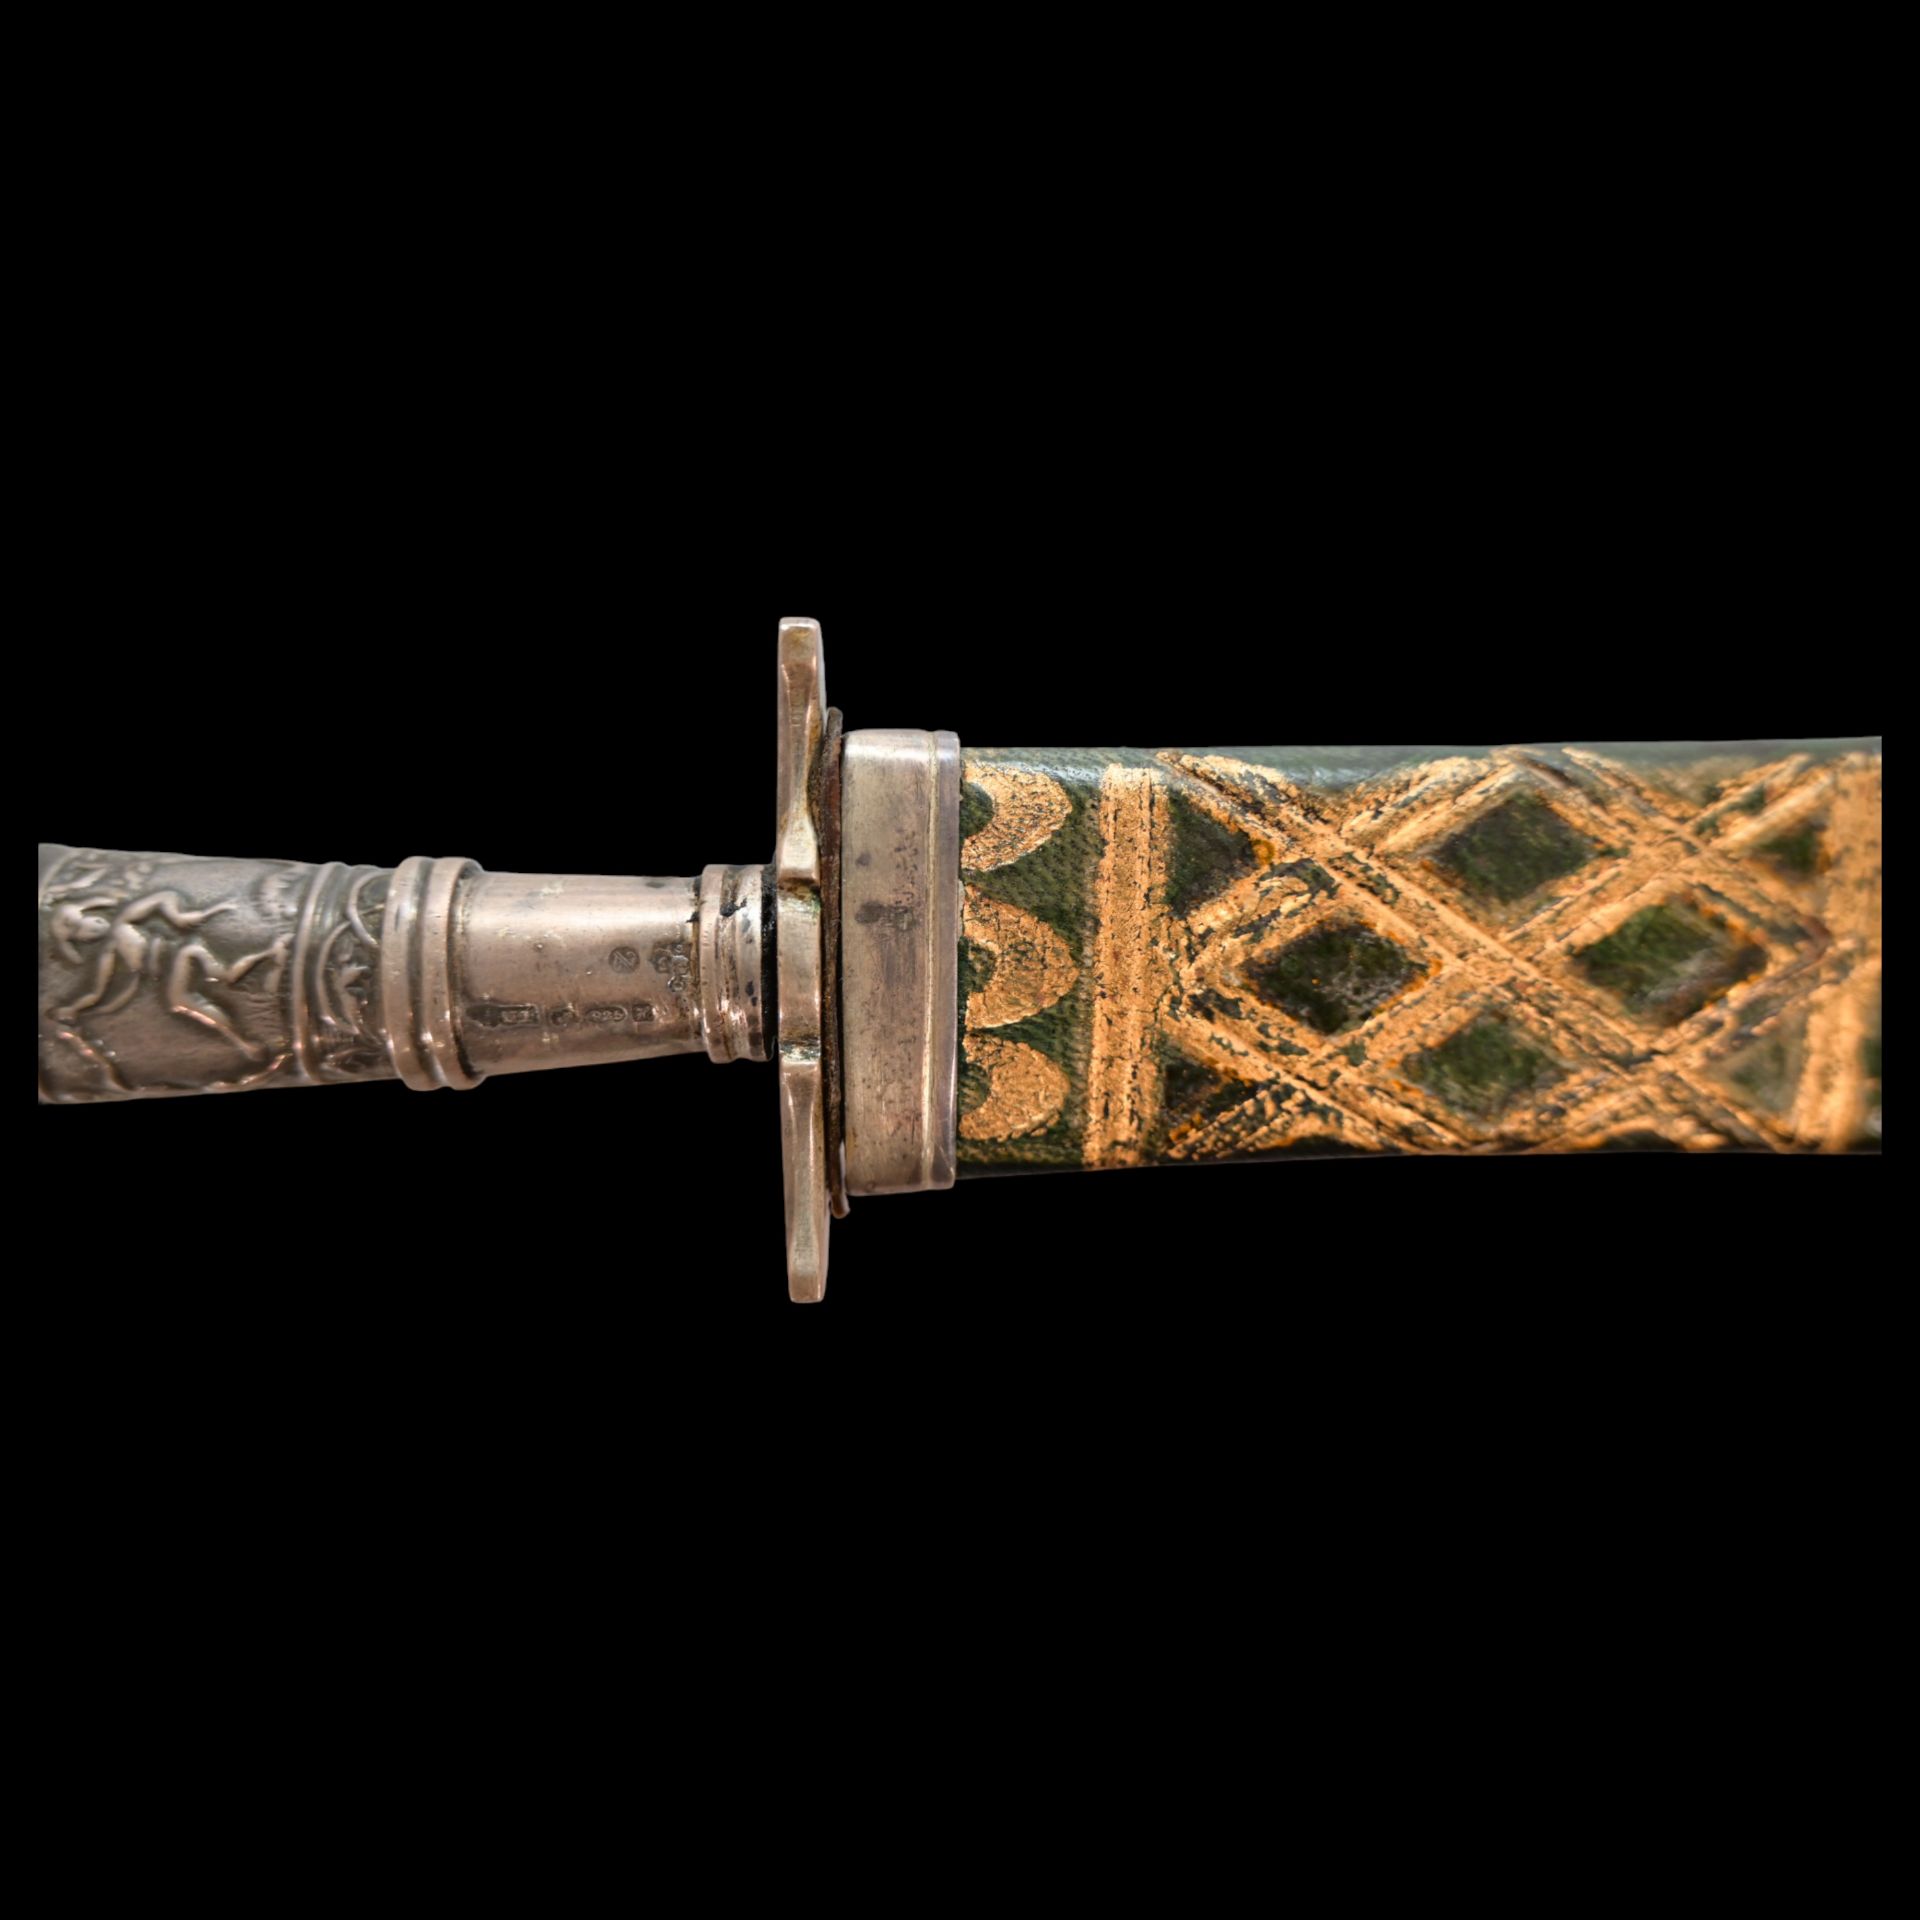 A silver mounted hunting knife, France 19th century. - Image 6 of 13